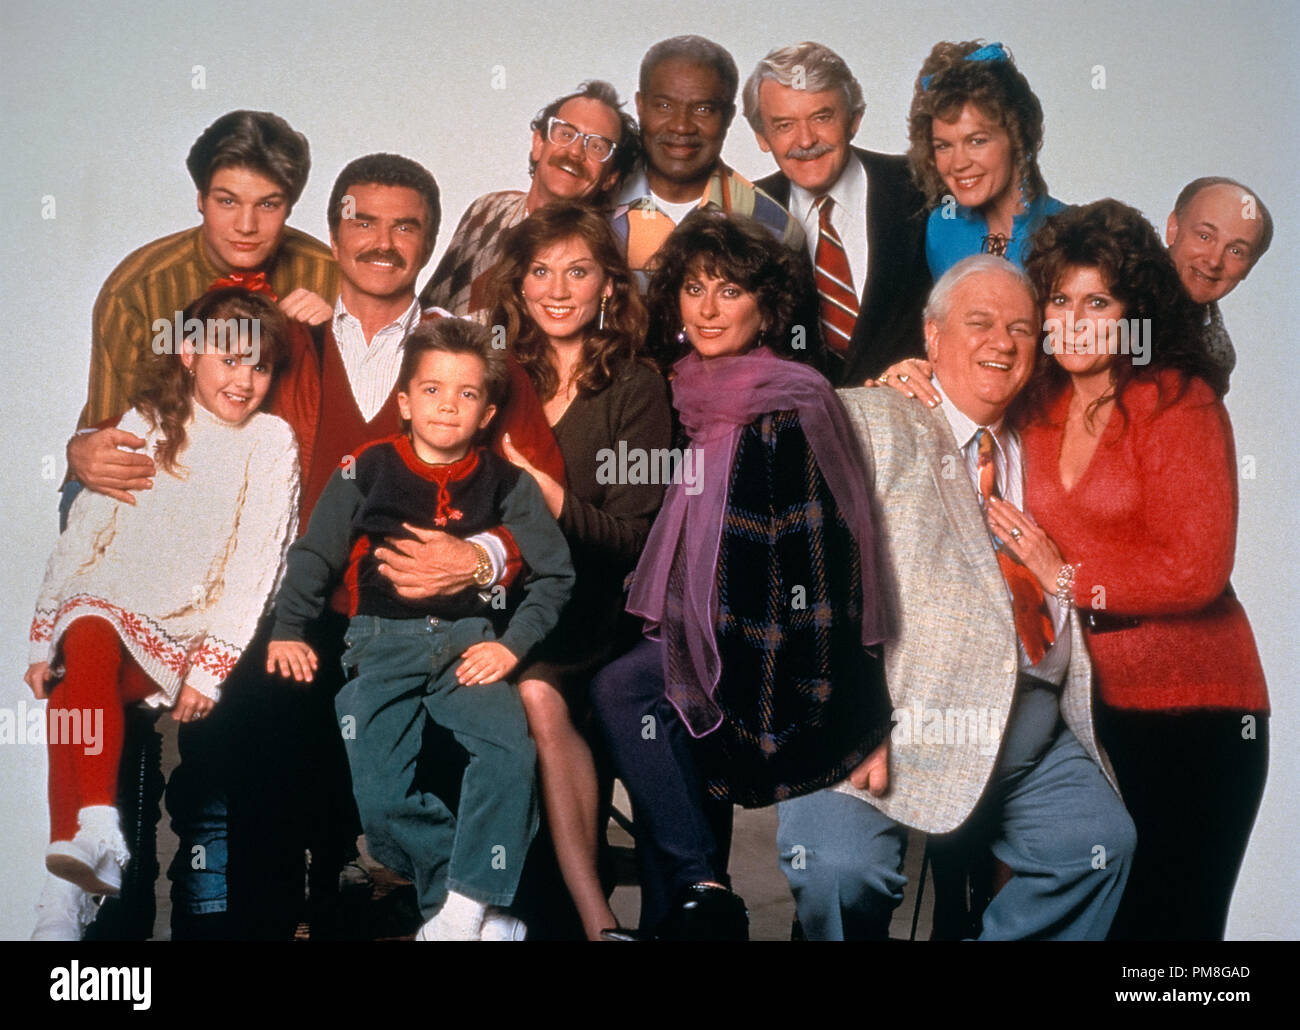 Film still / publicity still from 'Evening Shade' Burt Reynolds, Marilu Henner, Charles Durning, Michael Jeter, Hal Holbrook, Elizabeth Ashley, Ossie Davis, Ann Wedgeworth, Jay R. Ferguson, Candace Hutson, Jacob Parker, Alexa Vega circa 1993   File Reference # 31371312THA  For Editorial Use Only All Rights Reserved Stock Photo